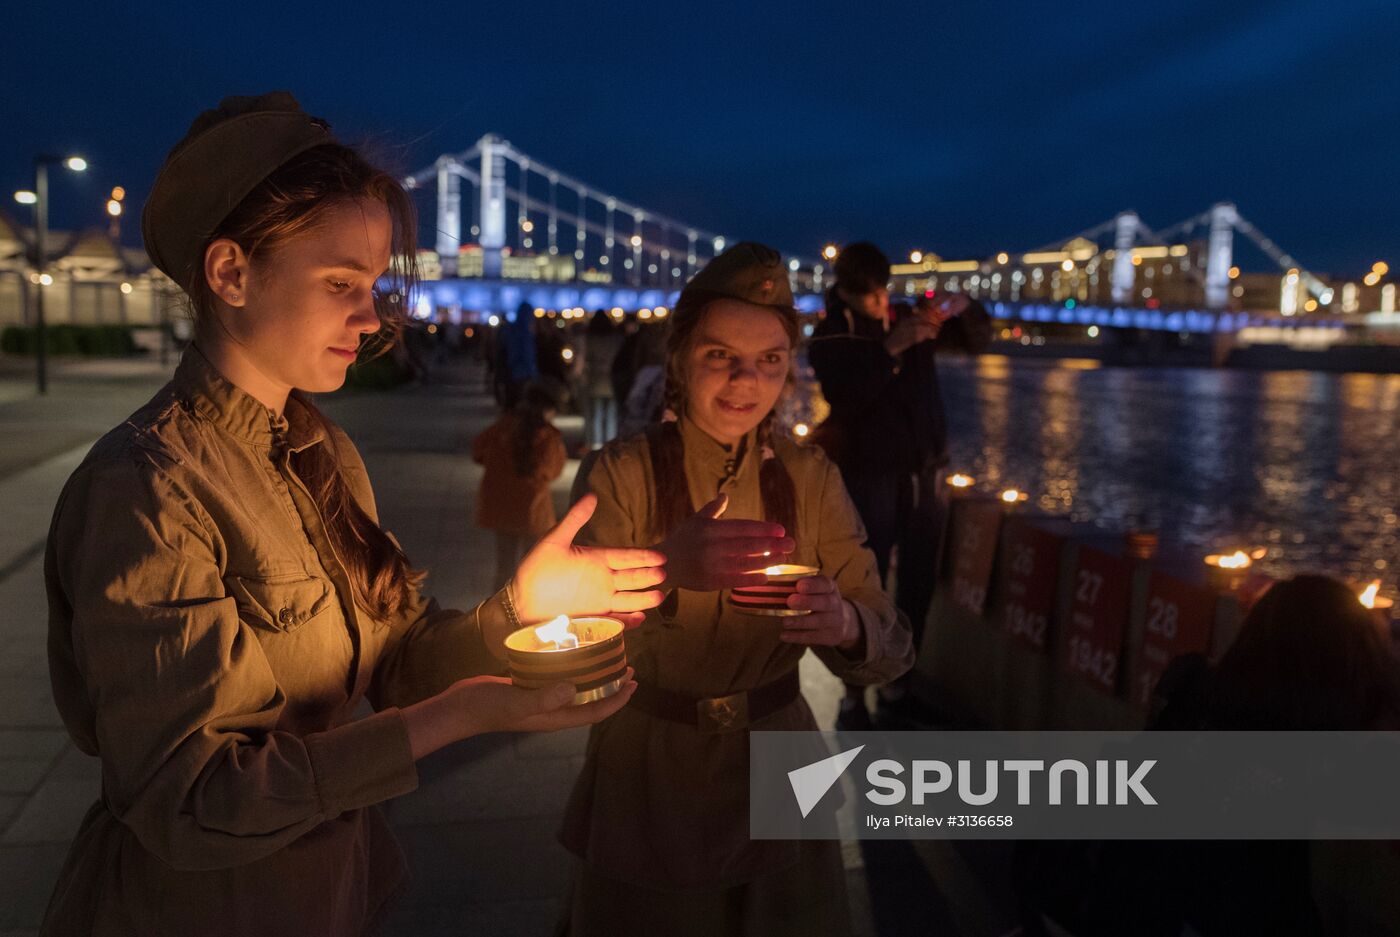 Day of Memory and Grief in Moscow